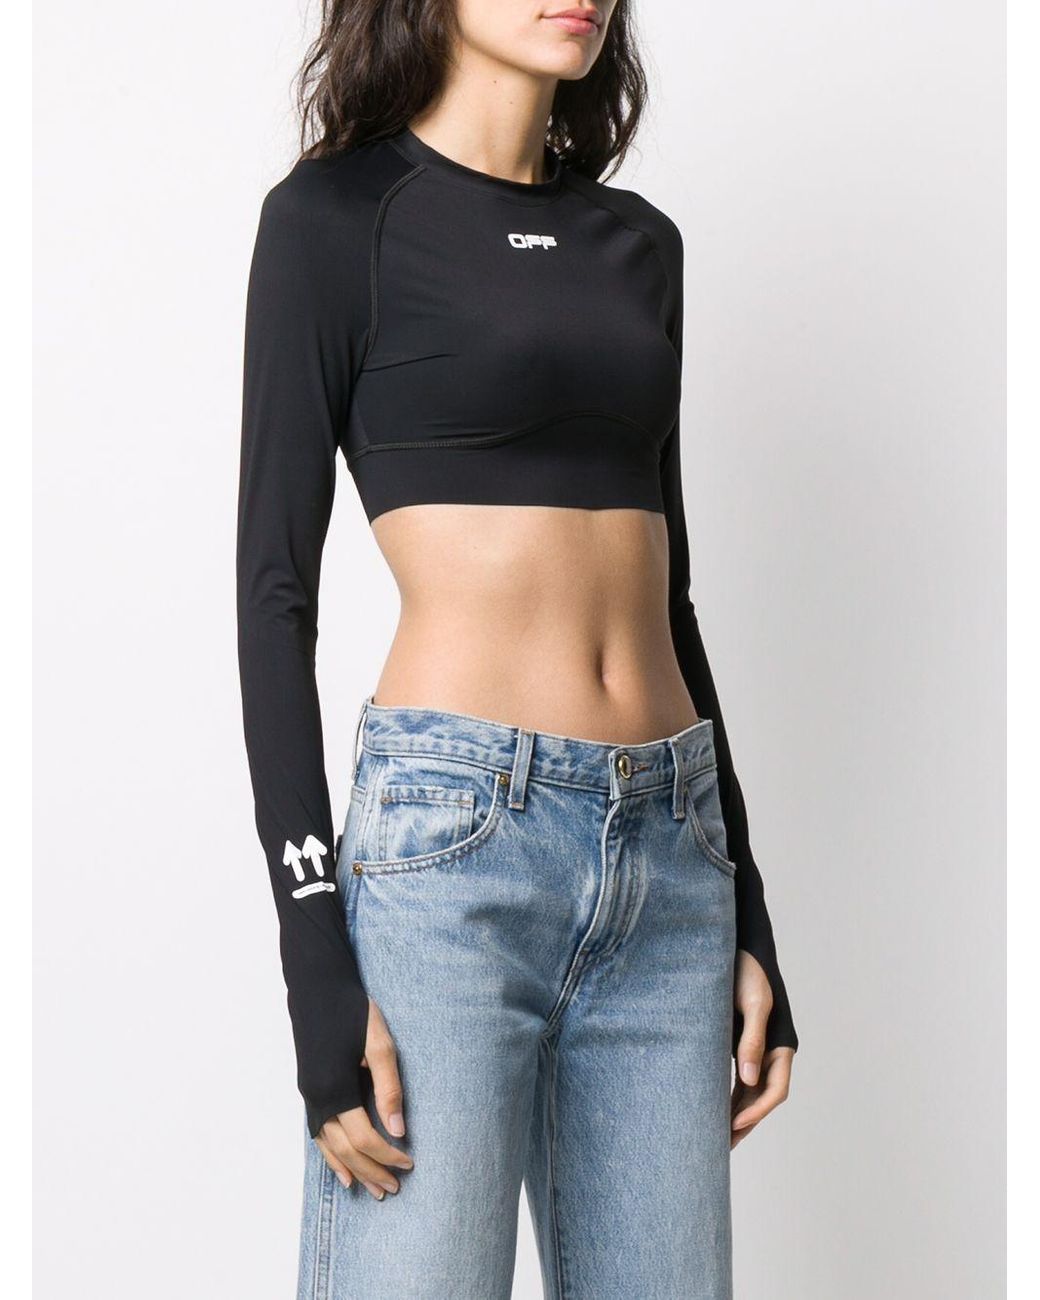 Off-White c/o Virgil Abloh Active Long Sleeve Crop Top in Black | Lyst